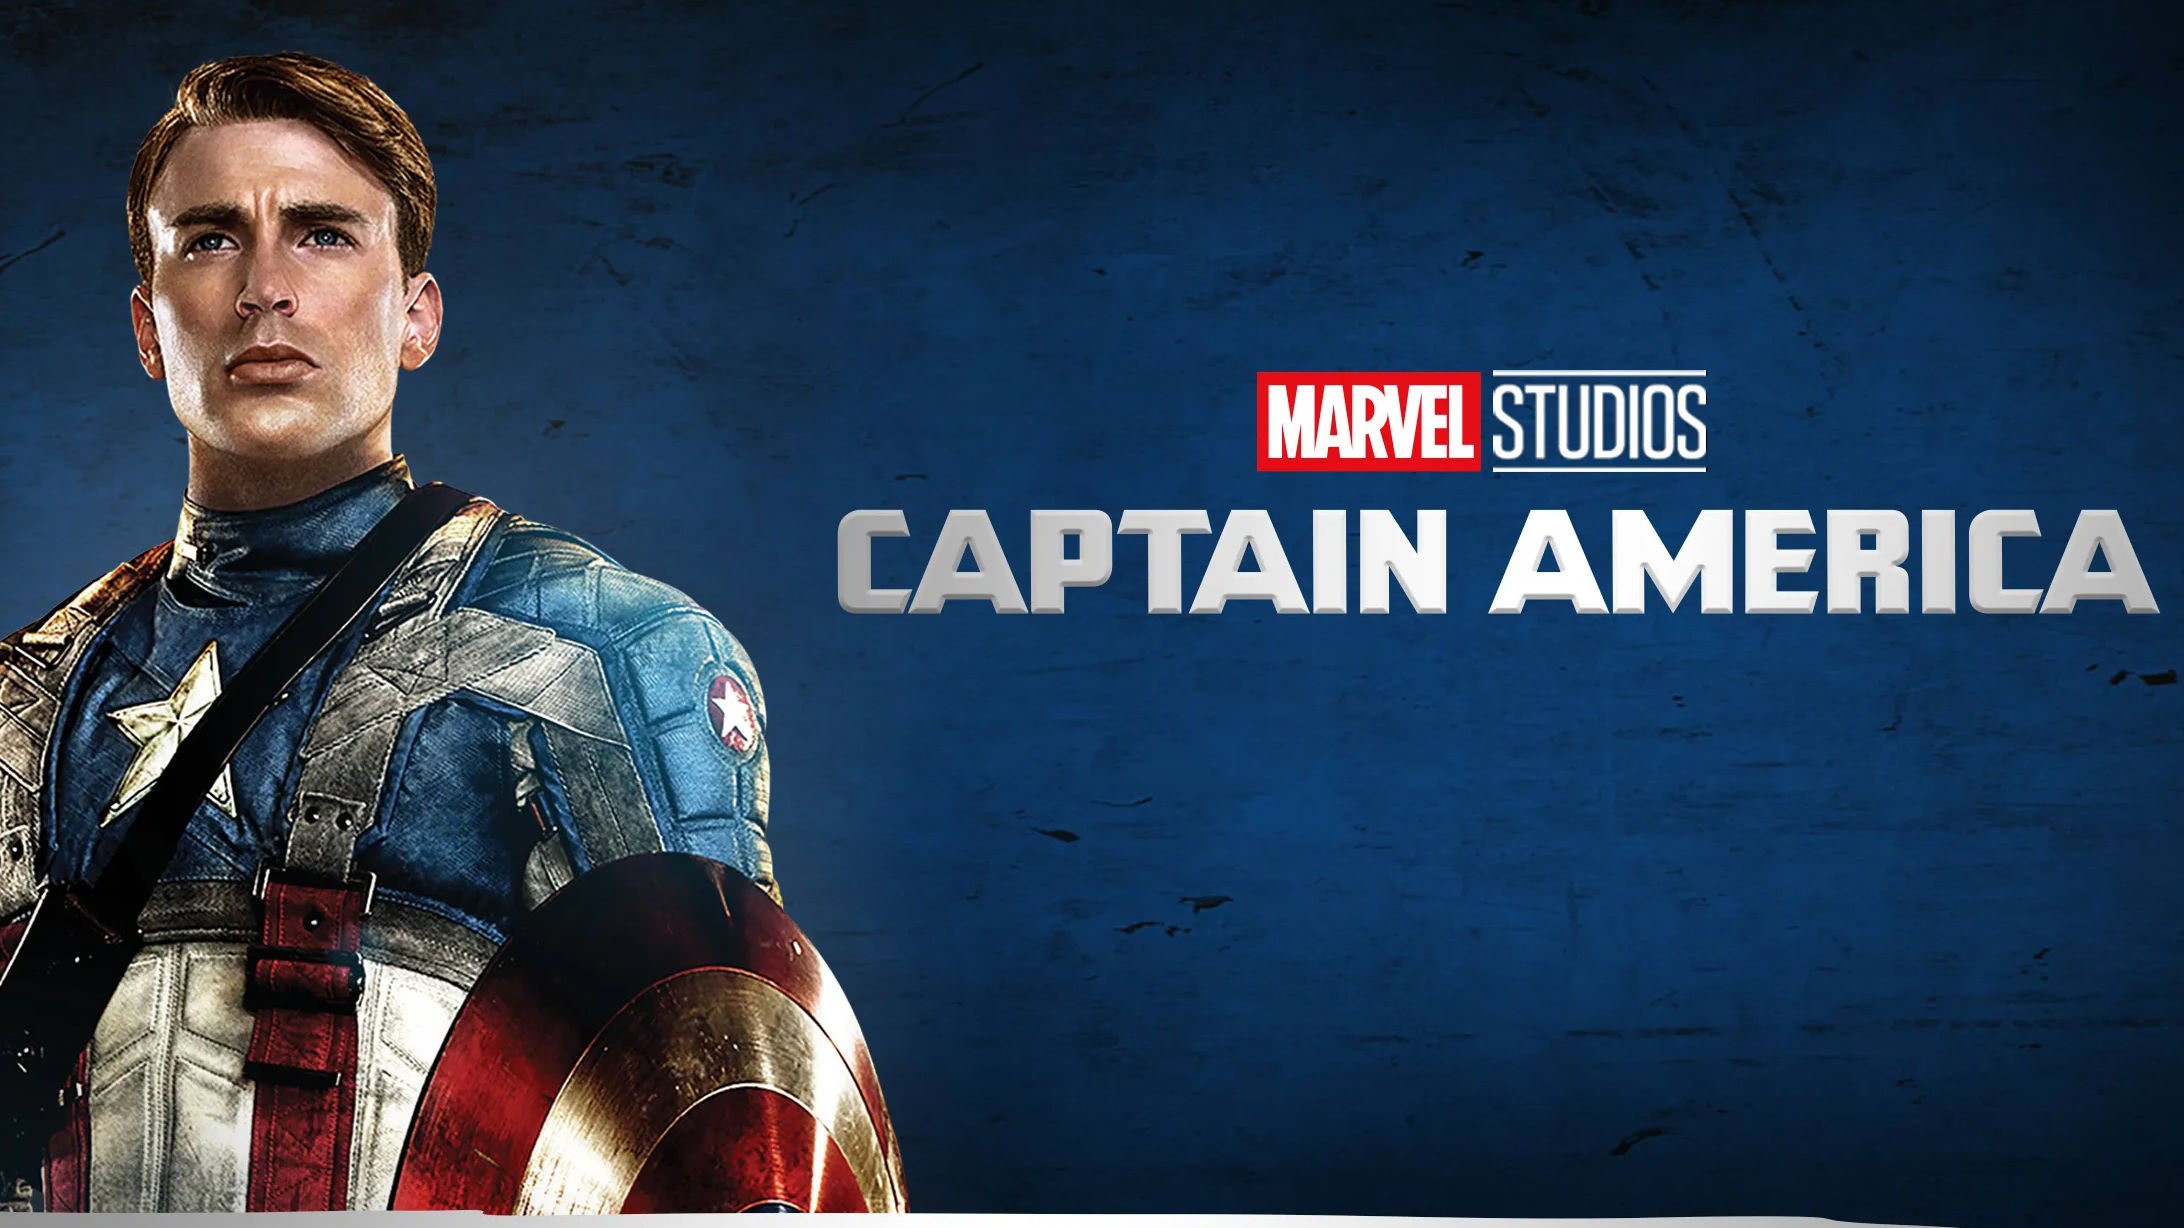 Return of stars and stripes. Fourth instalment of Captain America in works